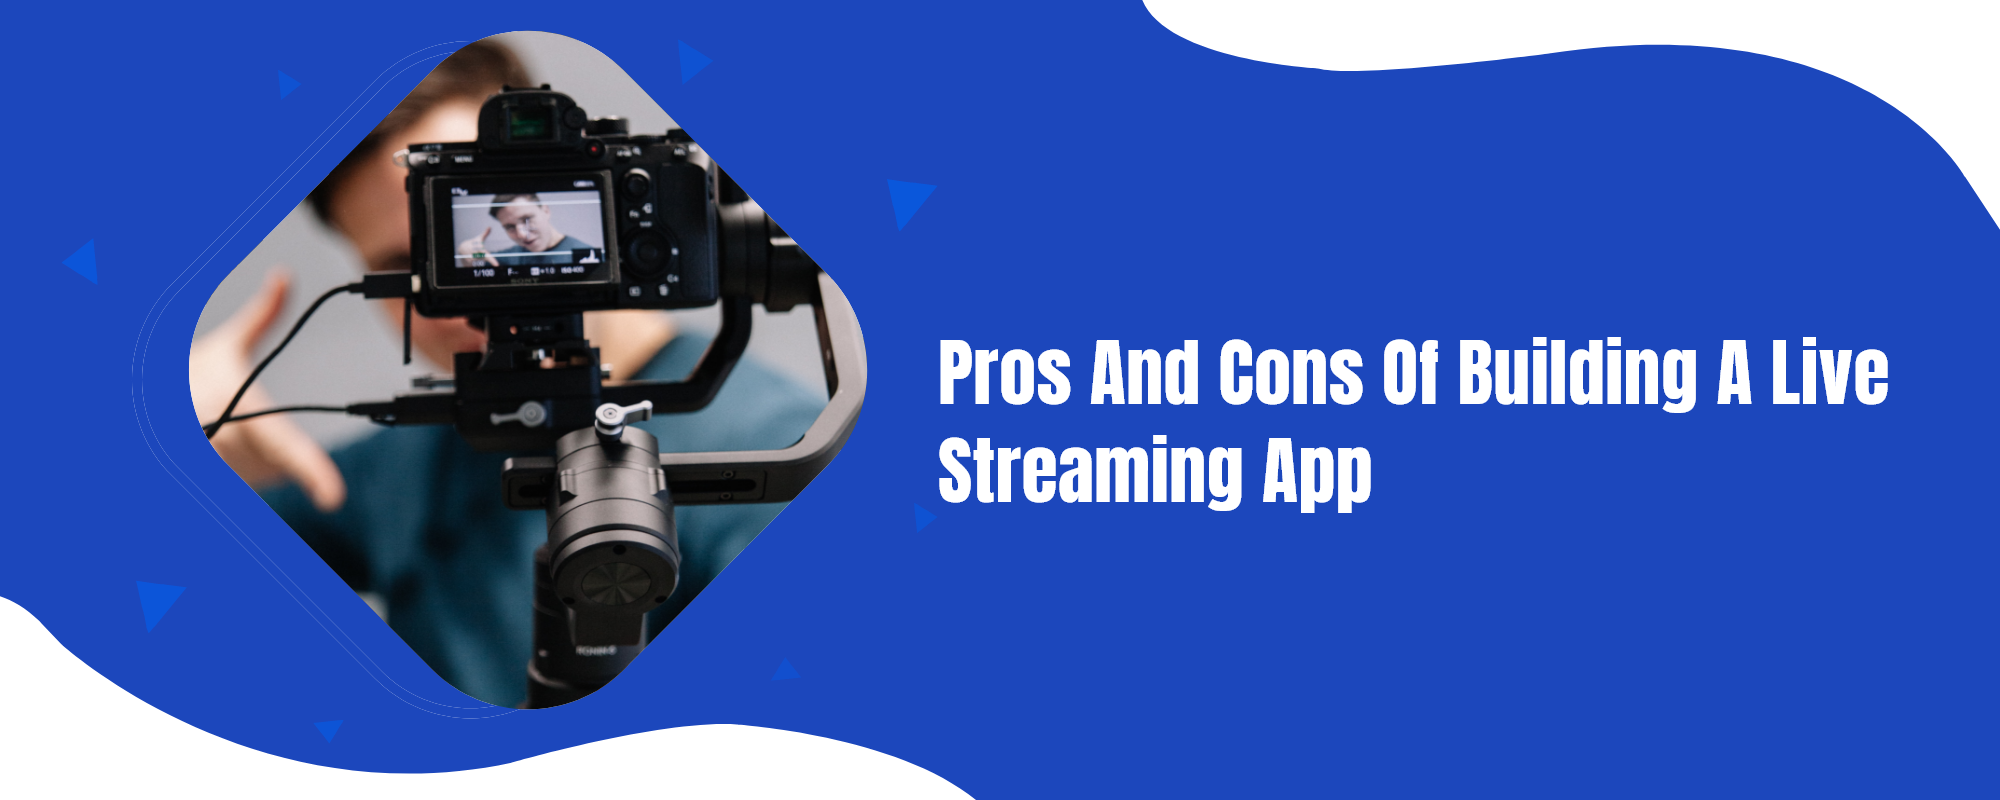 Building a live streaming app